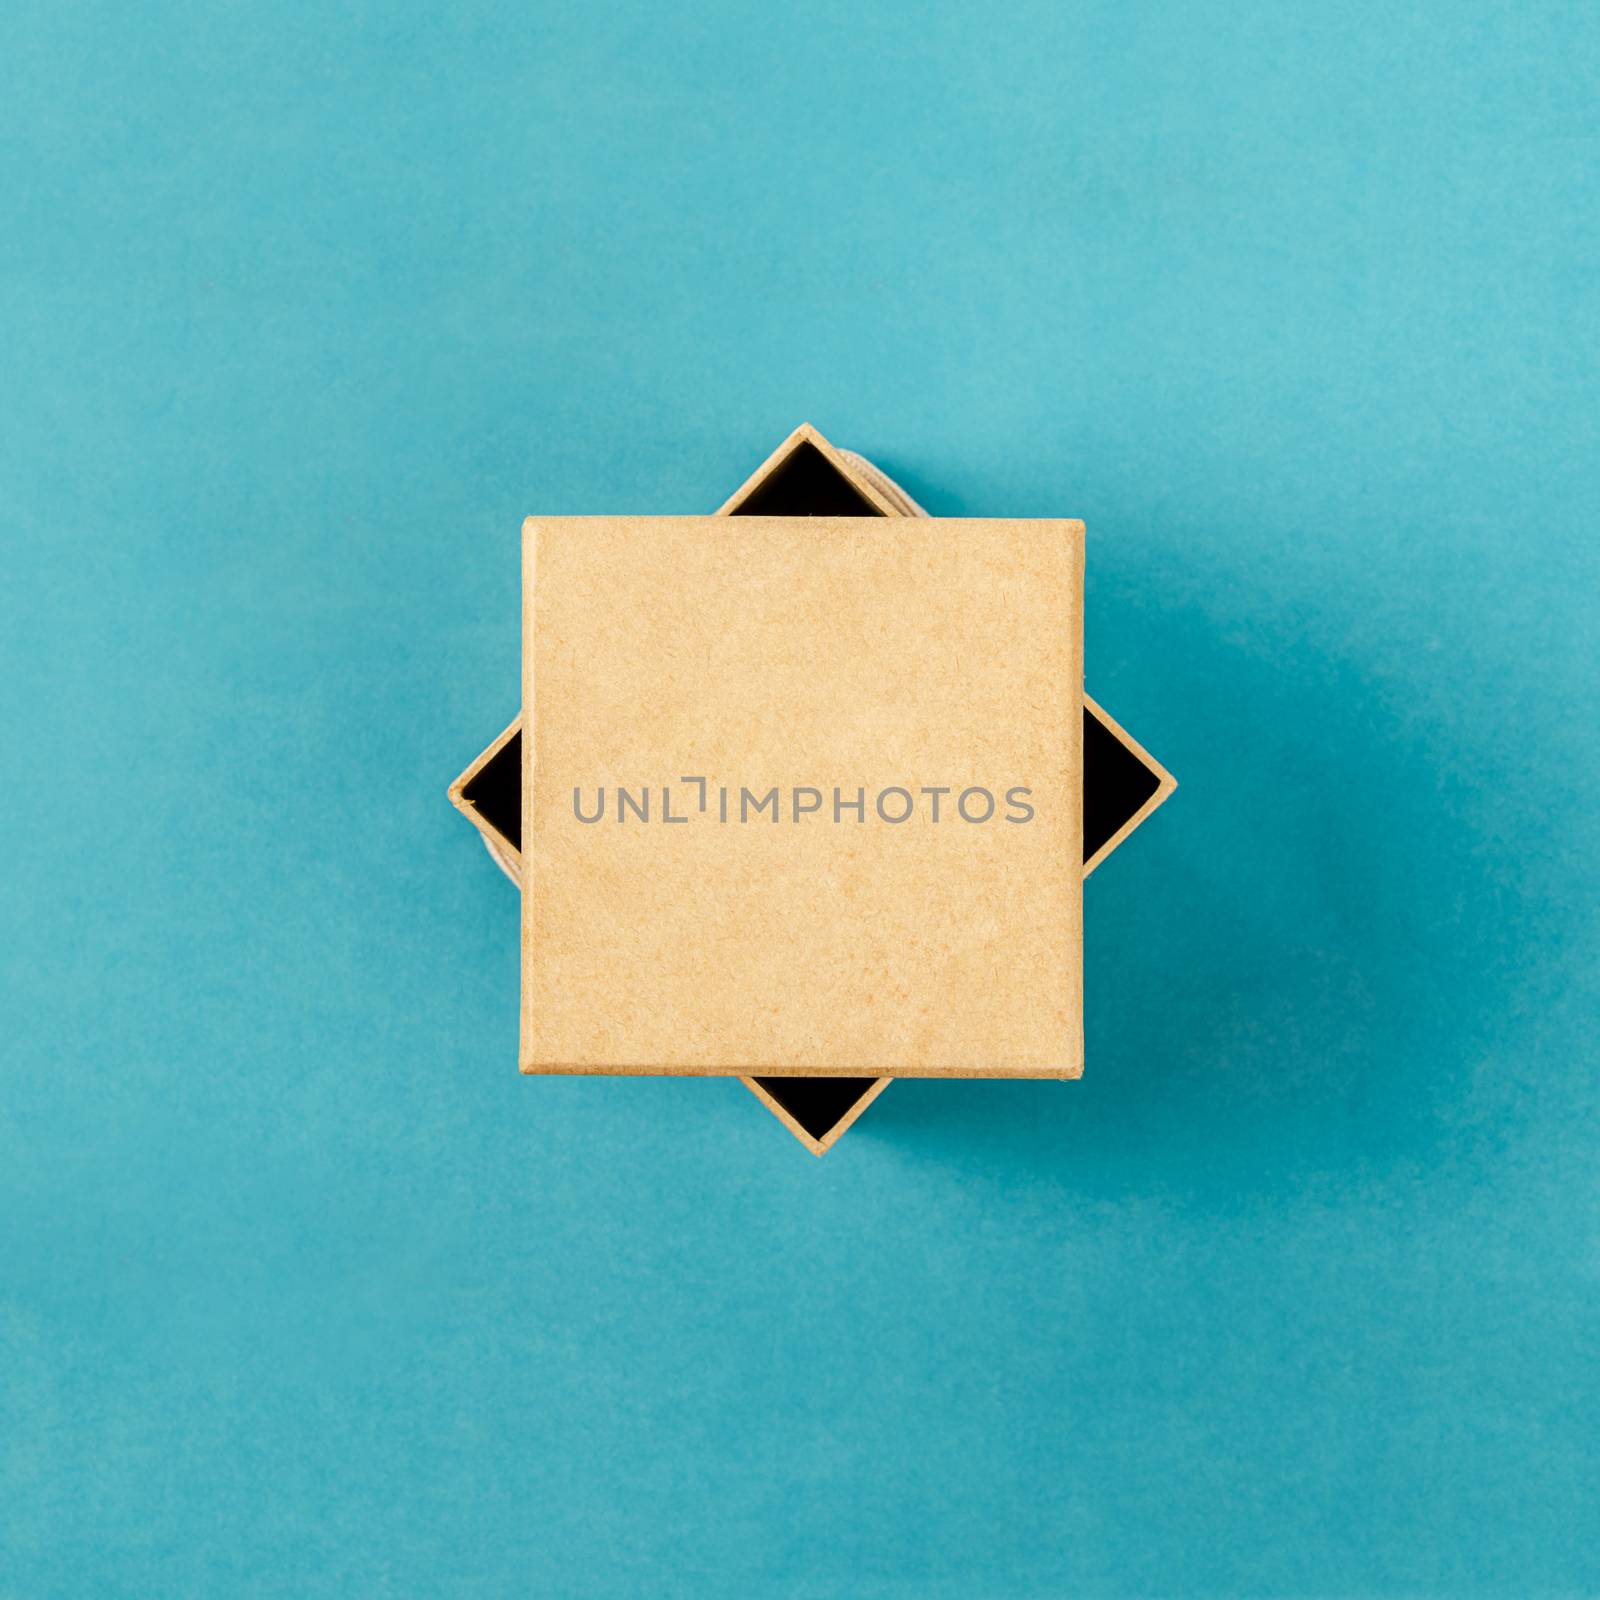 Top view of a present box package isolated on blue background.